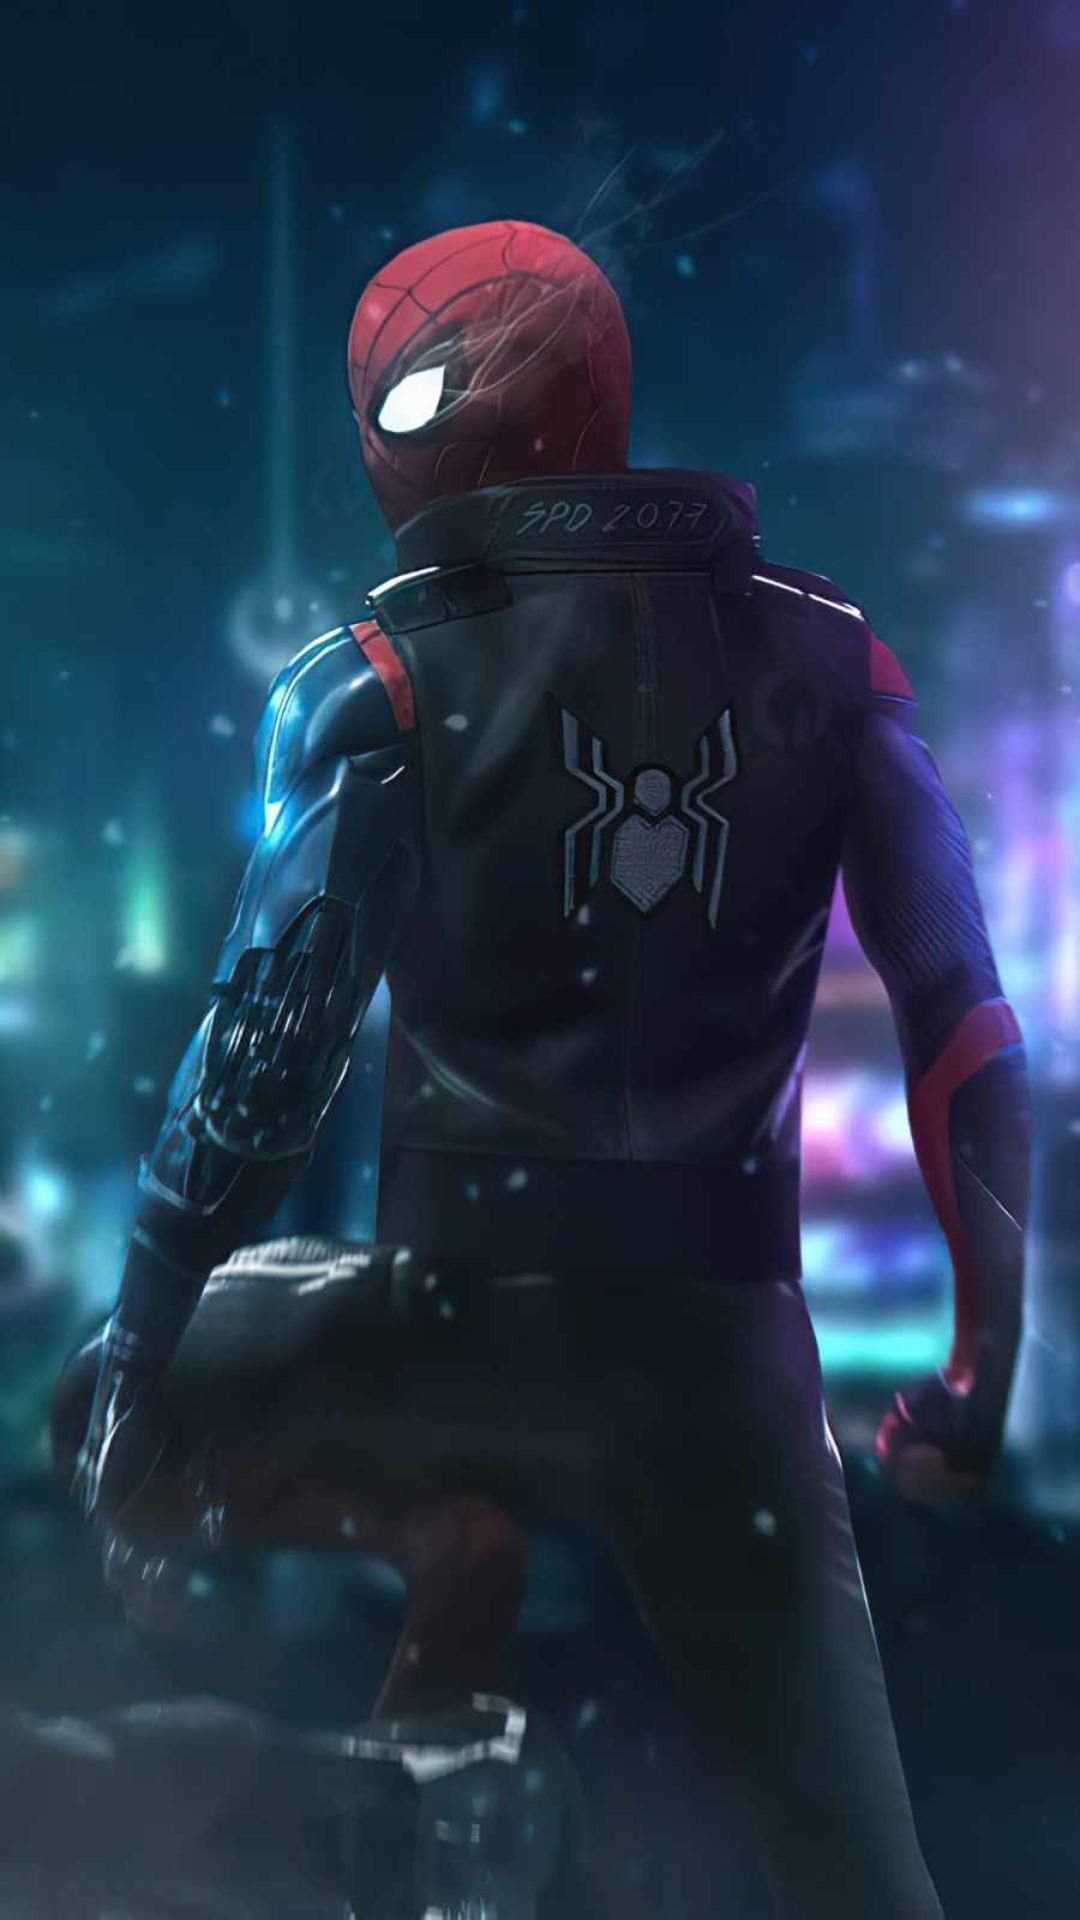 Cool Spiderman Images